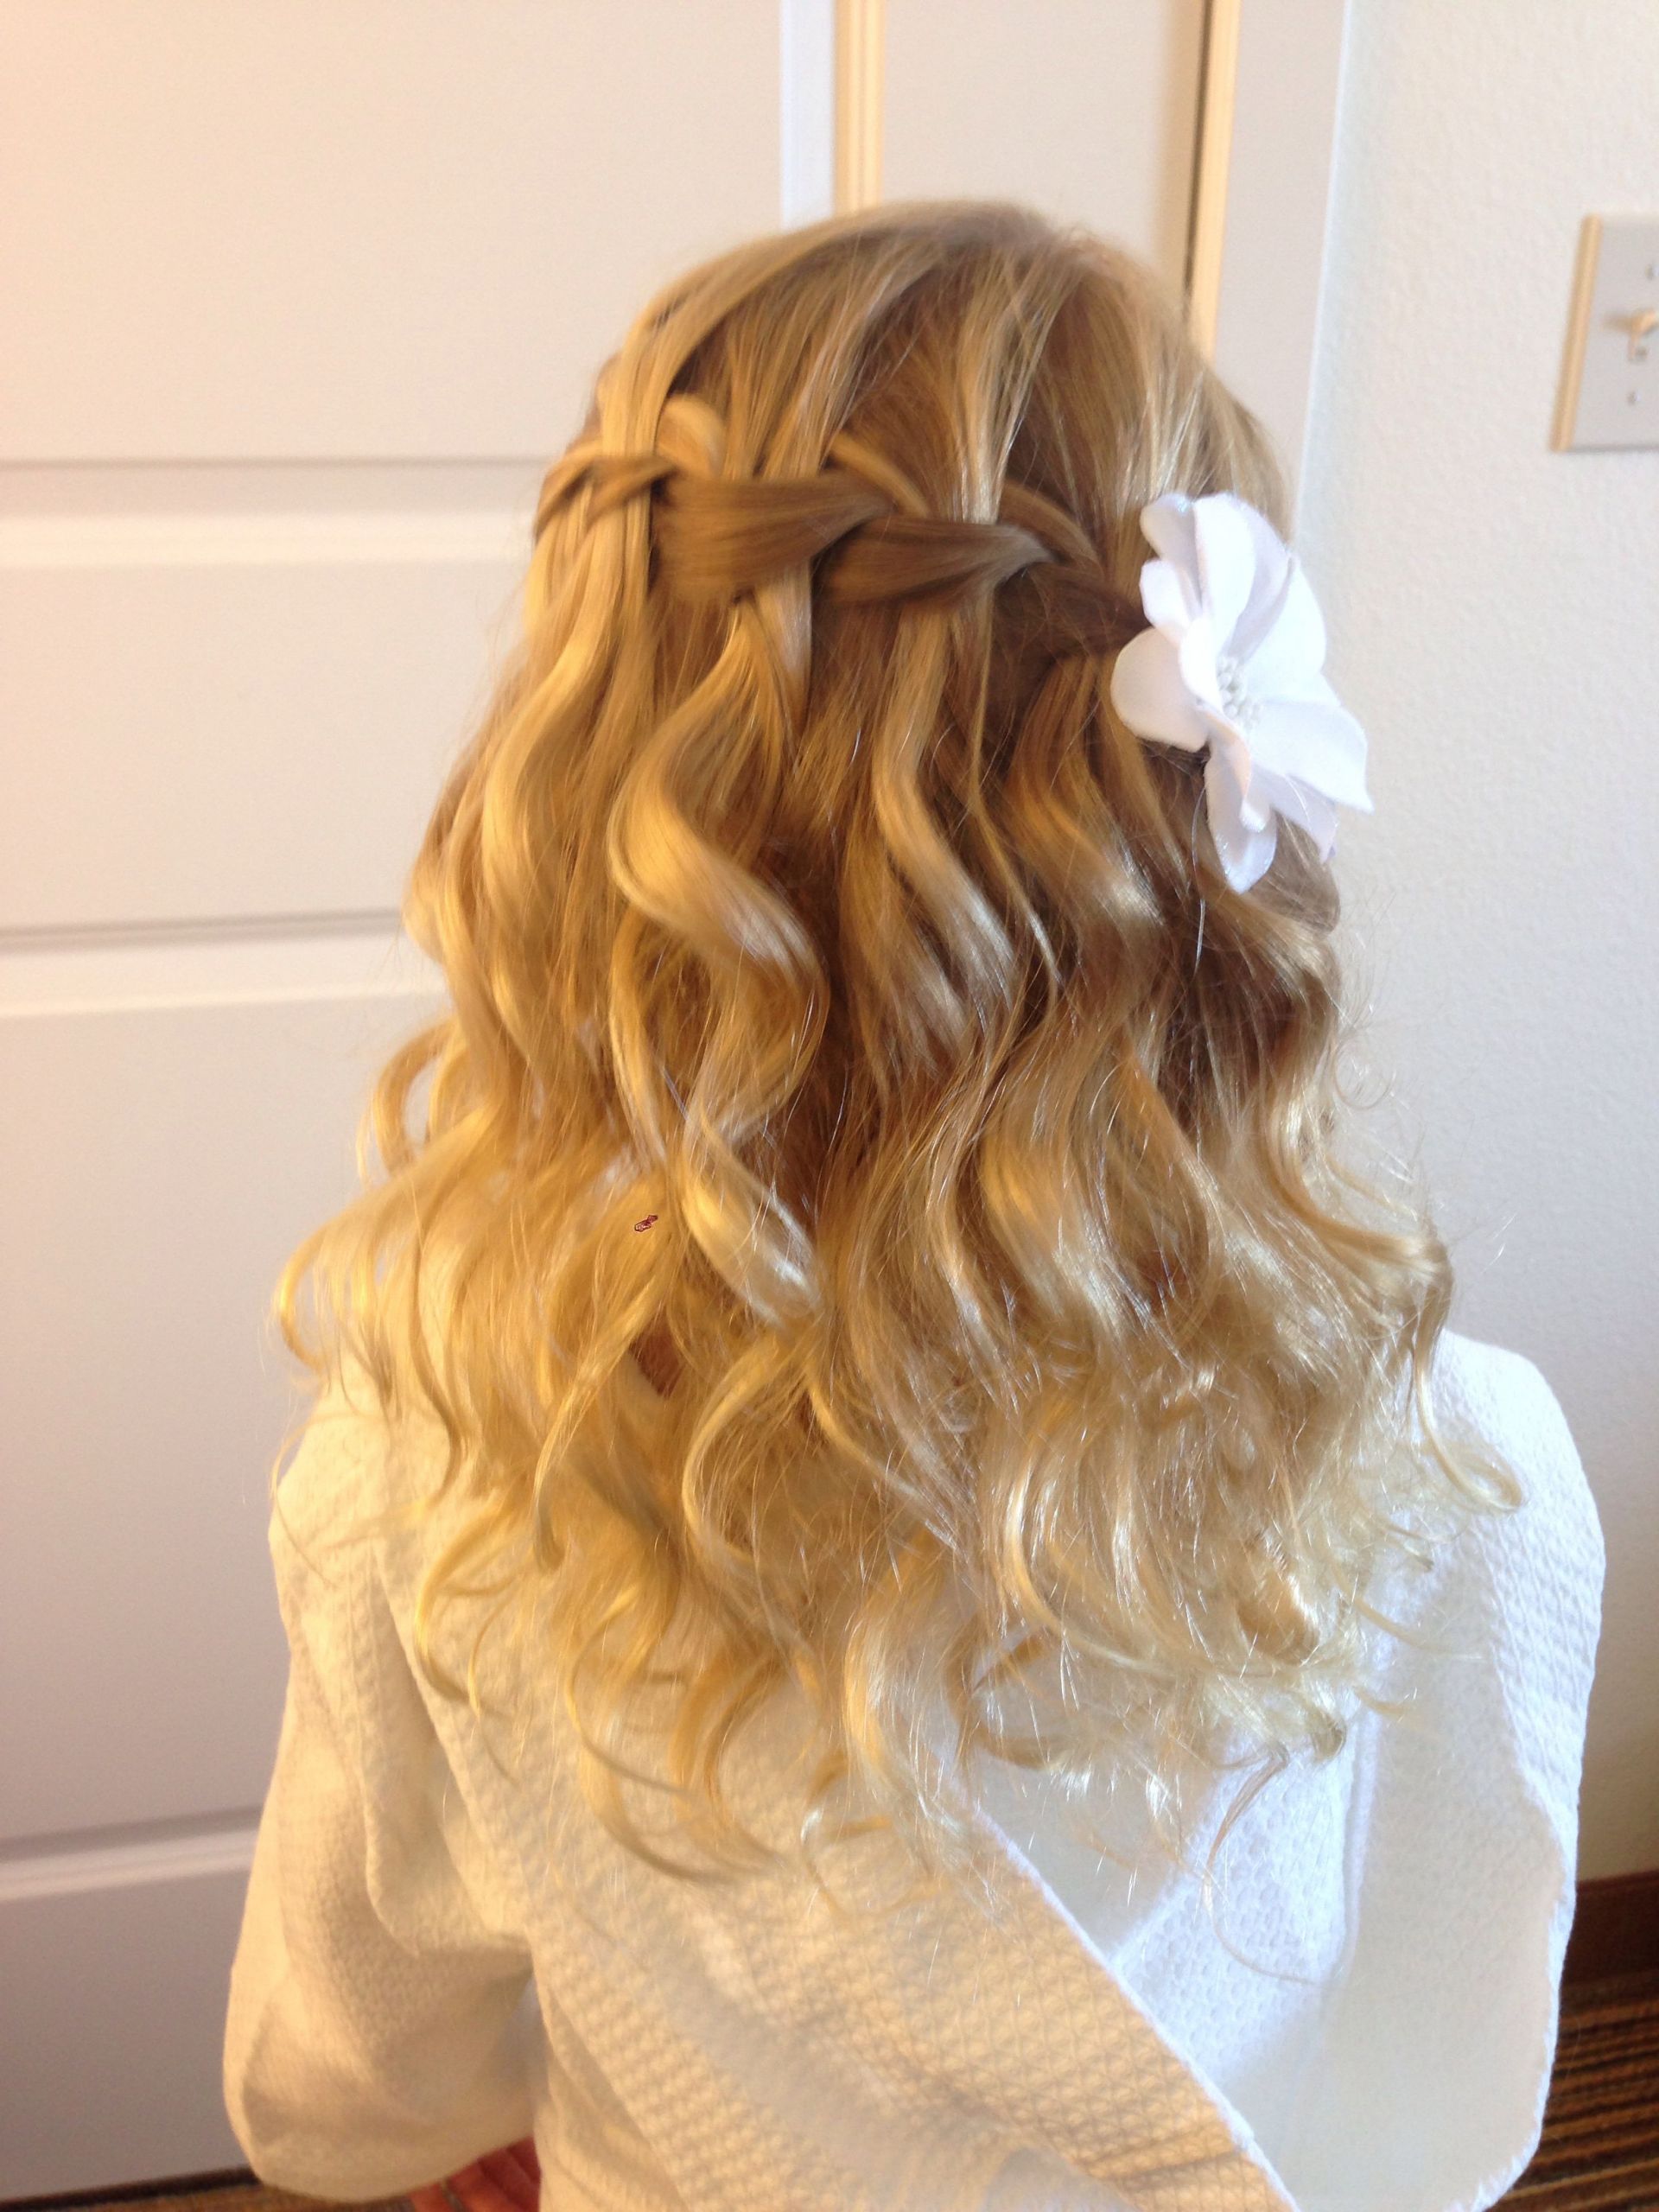 Wedding Hairstyles For Toddlers
 Flower girl hair by Valerie